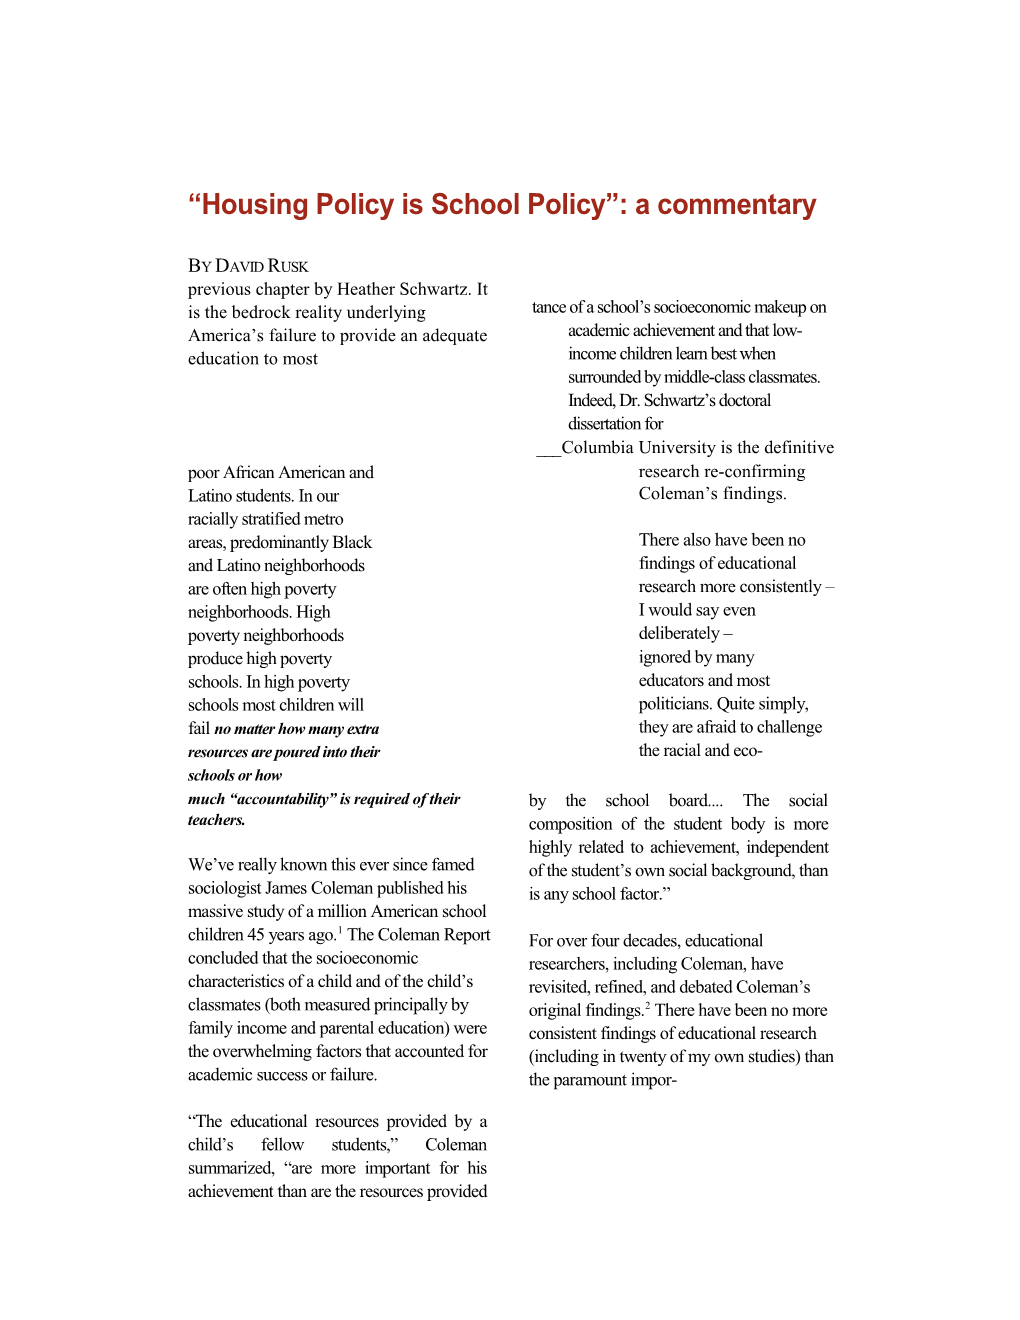 Housing Policy Is School Policy : a Commentary